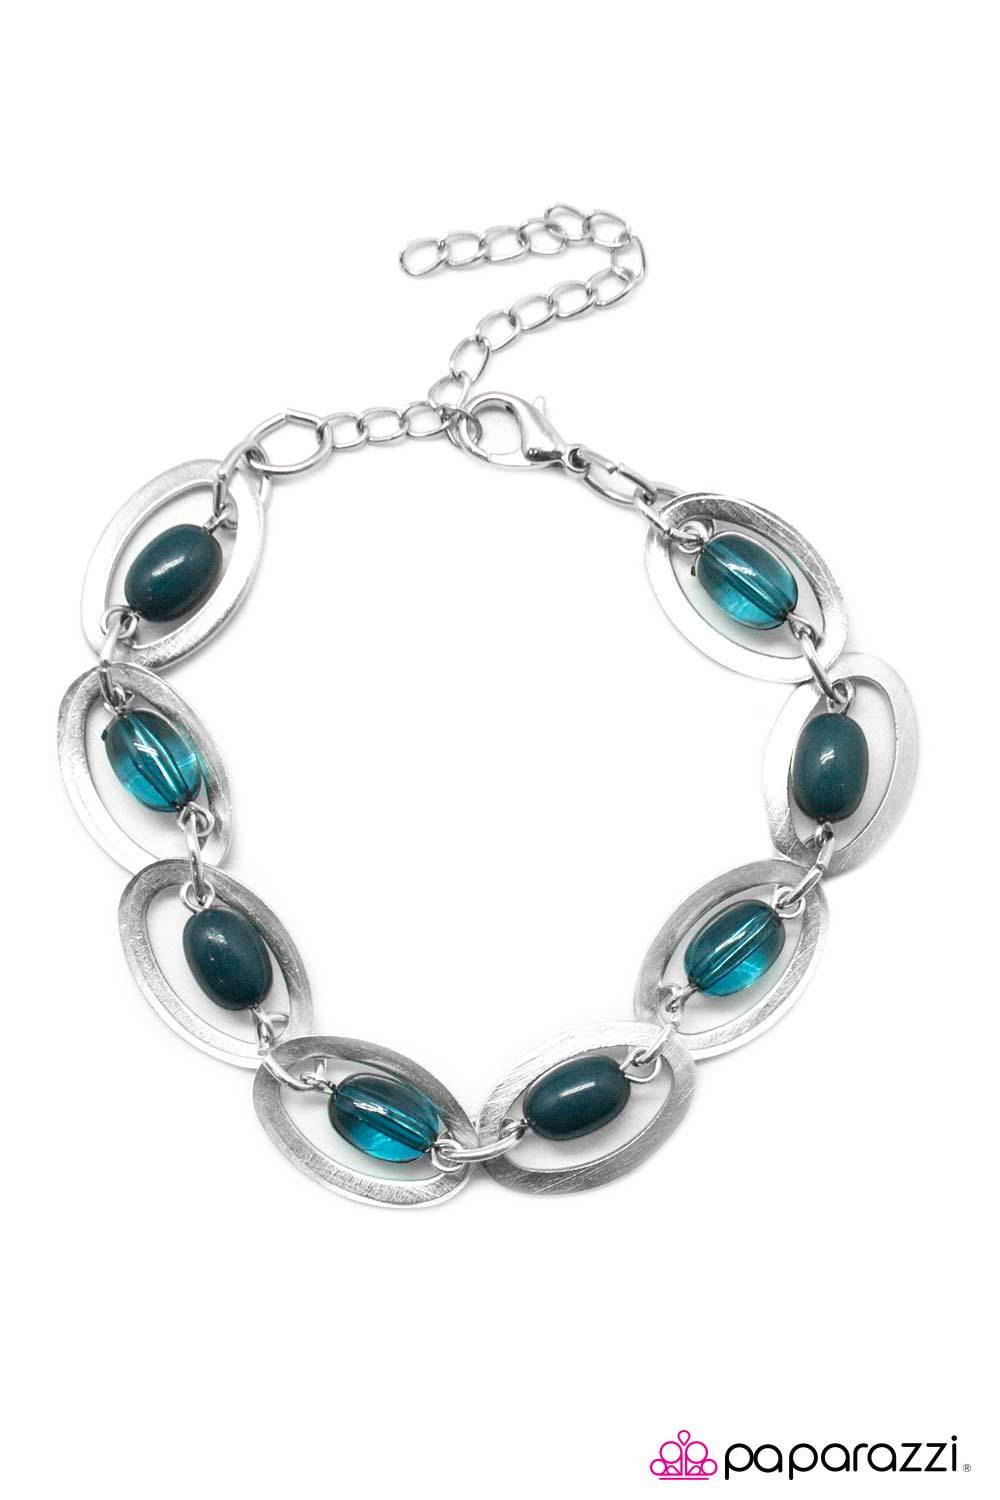 Sci-Fi Queen Silver and Blue Bracelet - Paparazzi Accessories-CarasShop.com - $5 Jewelry by Cara Jewels